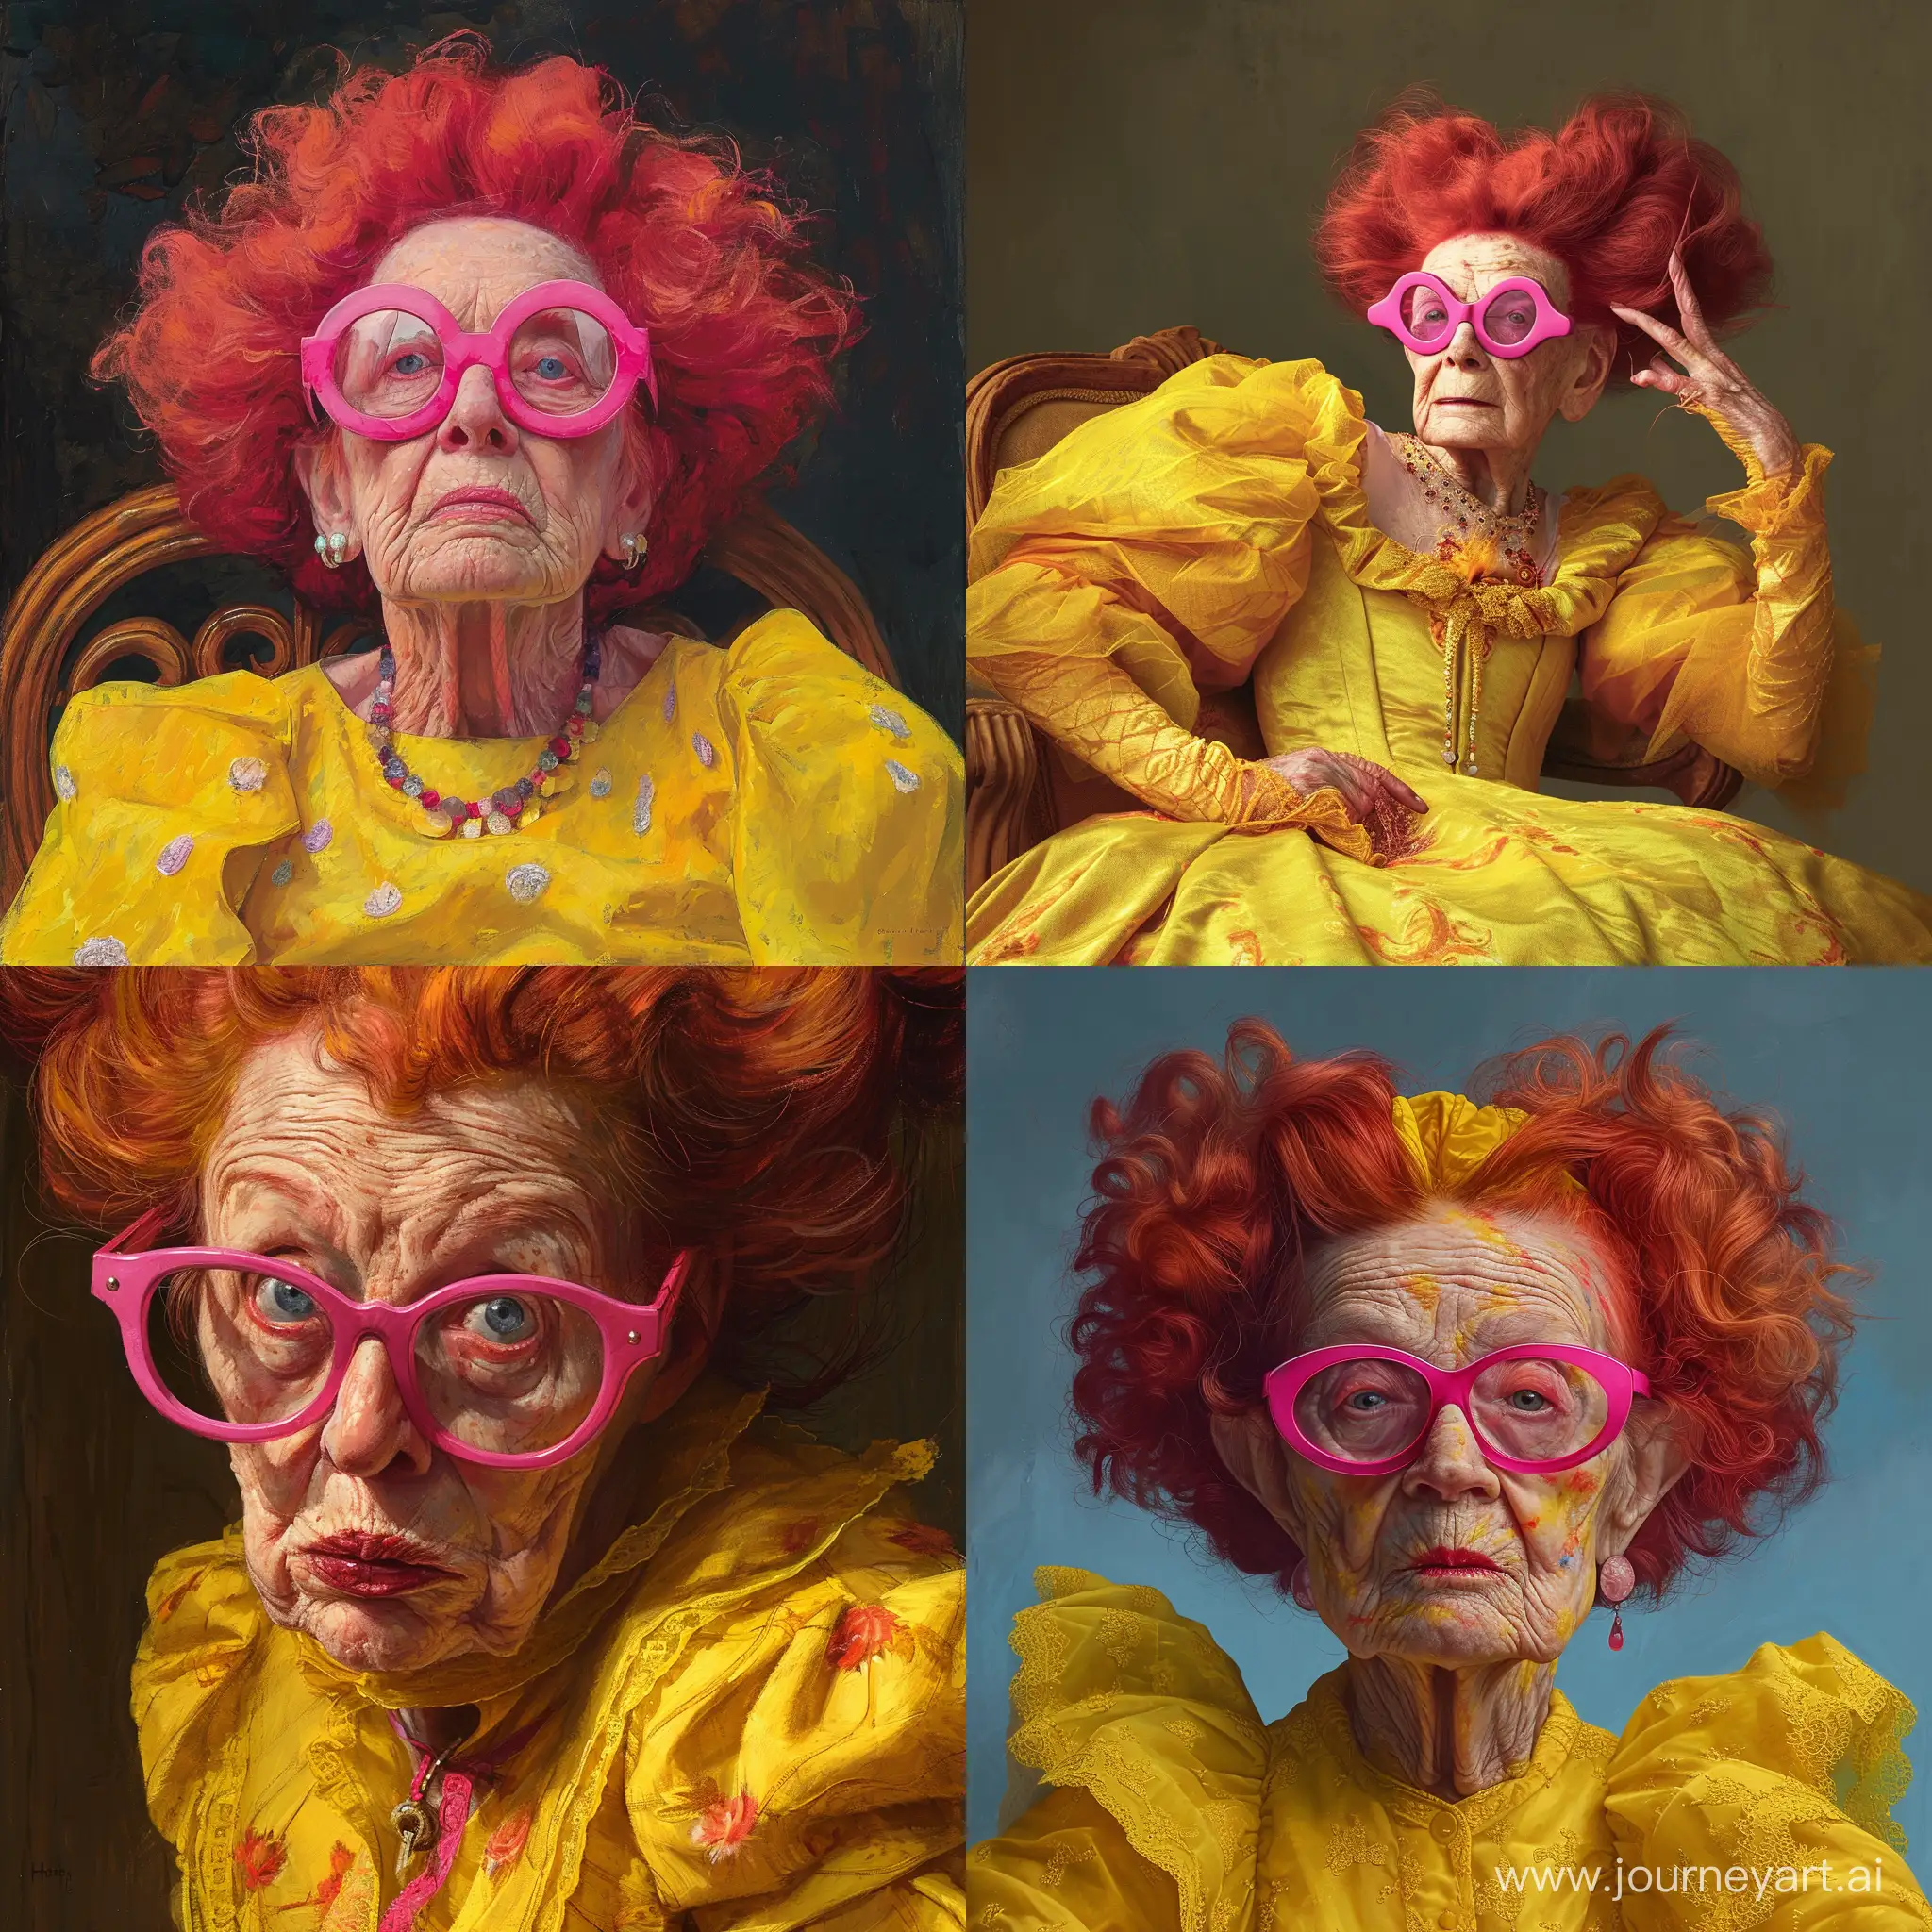 Elderly-Woman-in-Vibrant-Attire-with-Pink-Glasses-and-Yellow-Dress